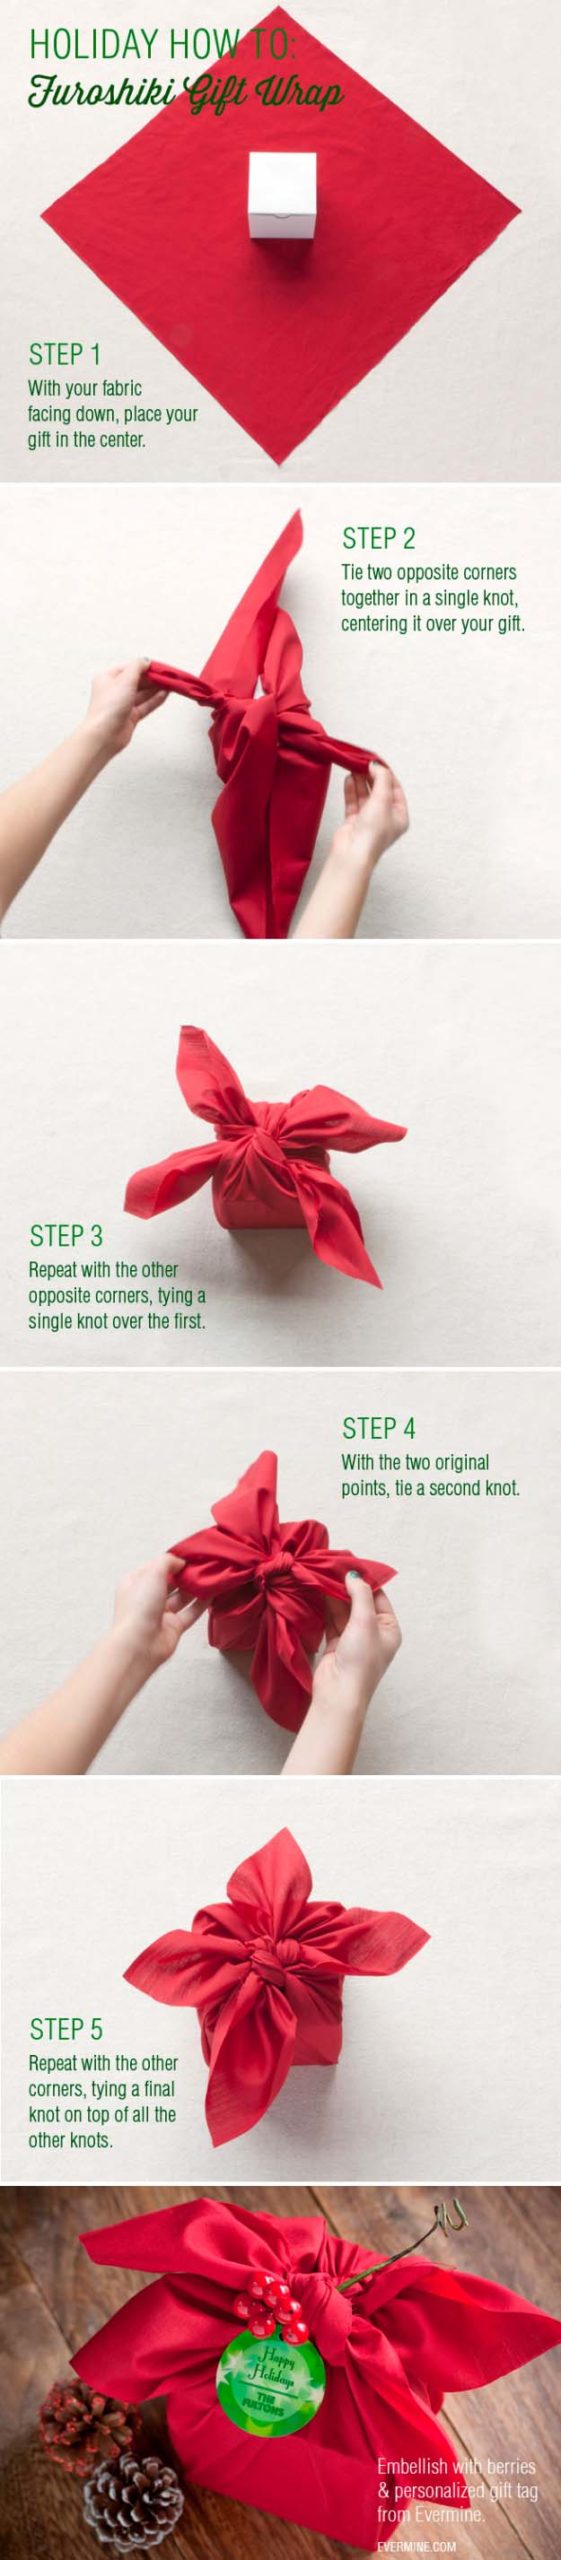 gift wrapping ideas without box